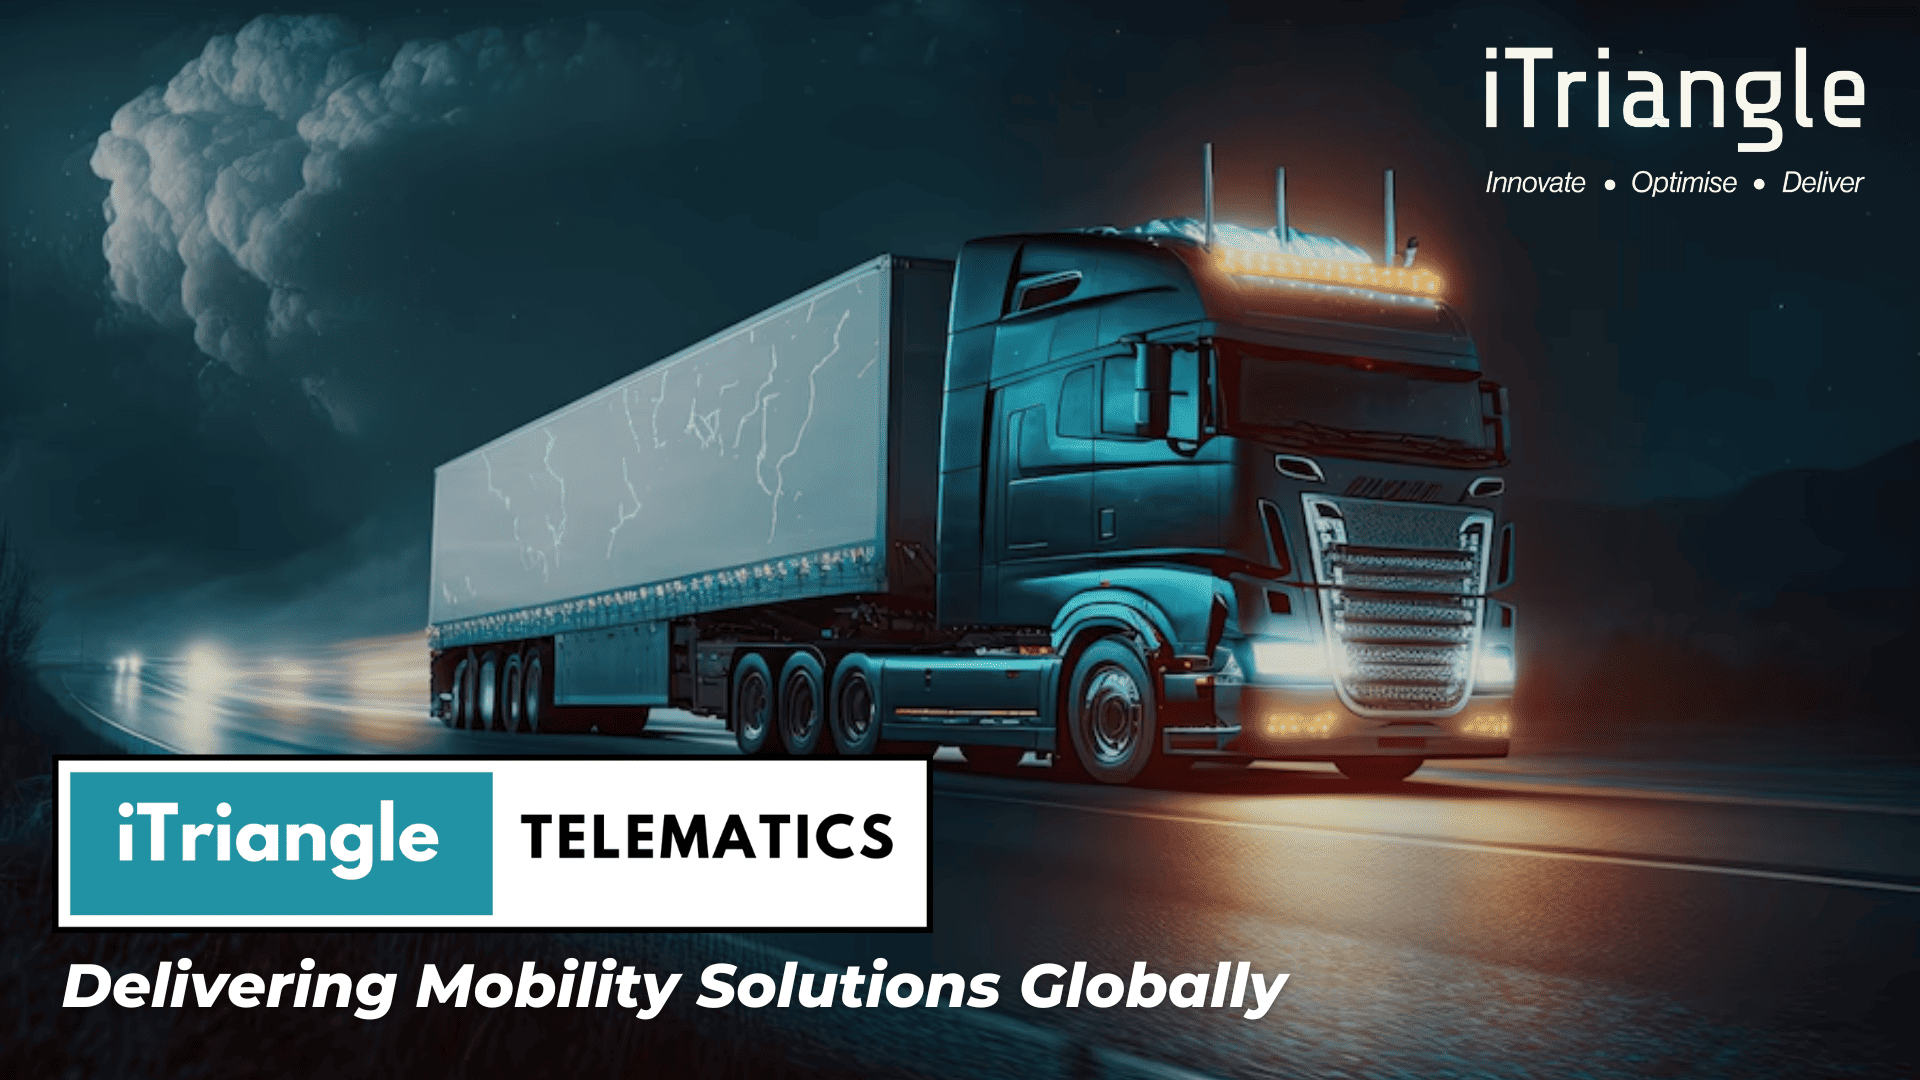 What is iTriangle Telematics?